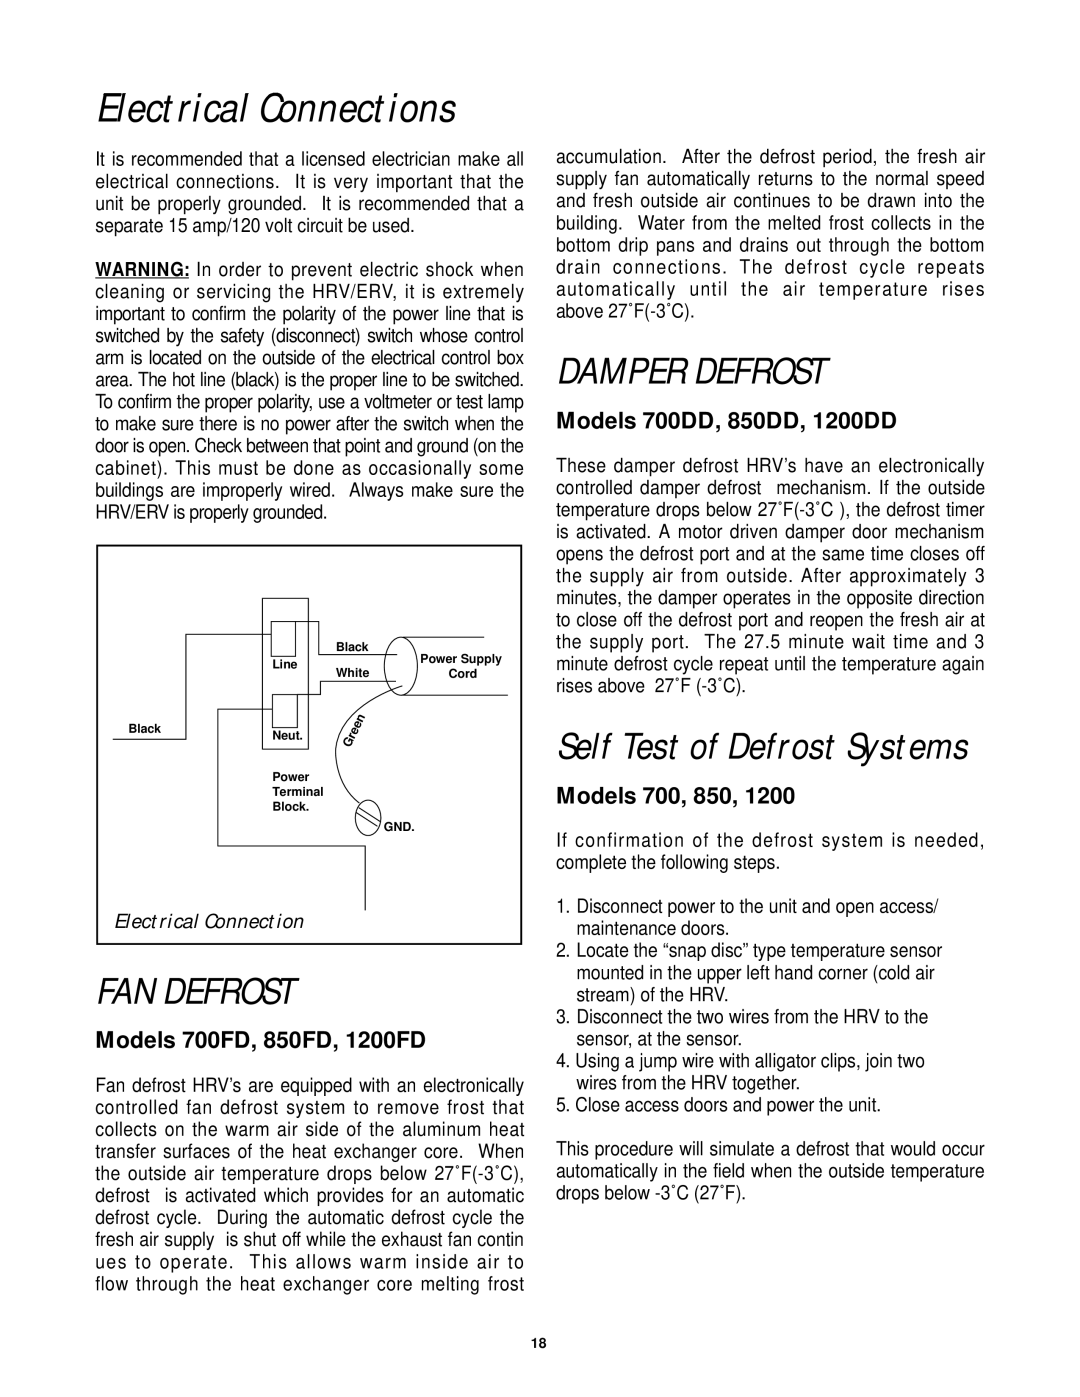 Lifebreath 700FD/DD Electrical Connections, Fan Defrost, Damper Defrost, Self Test of Defrost Systems, Models 700, 850 